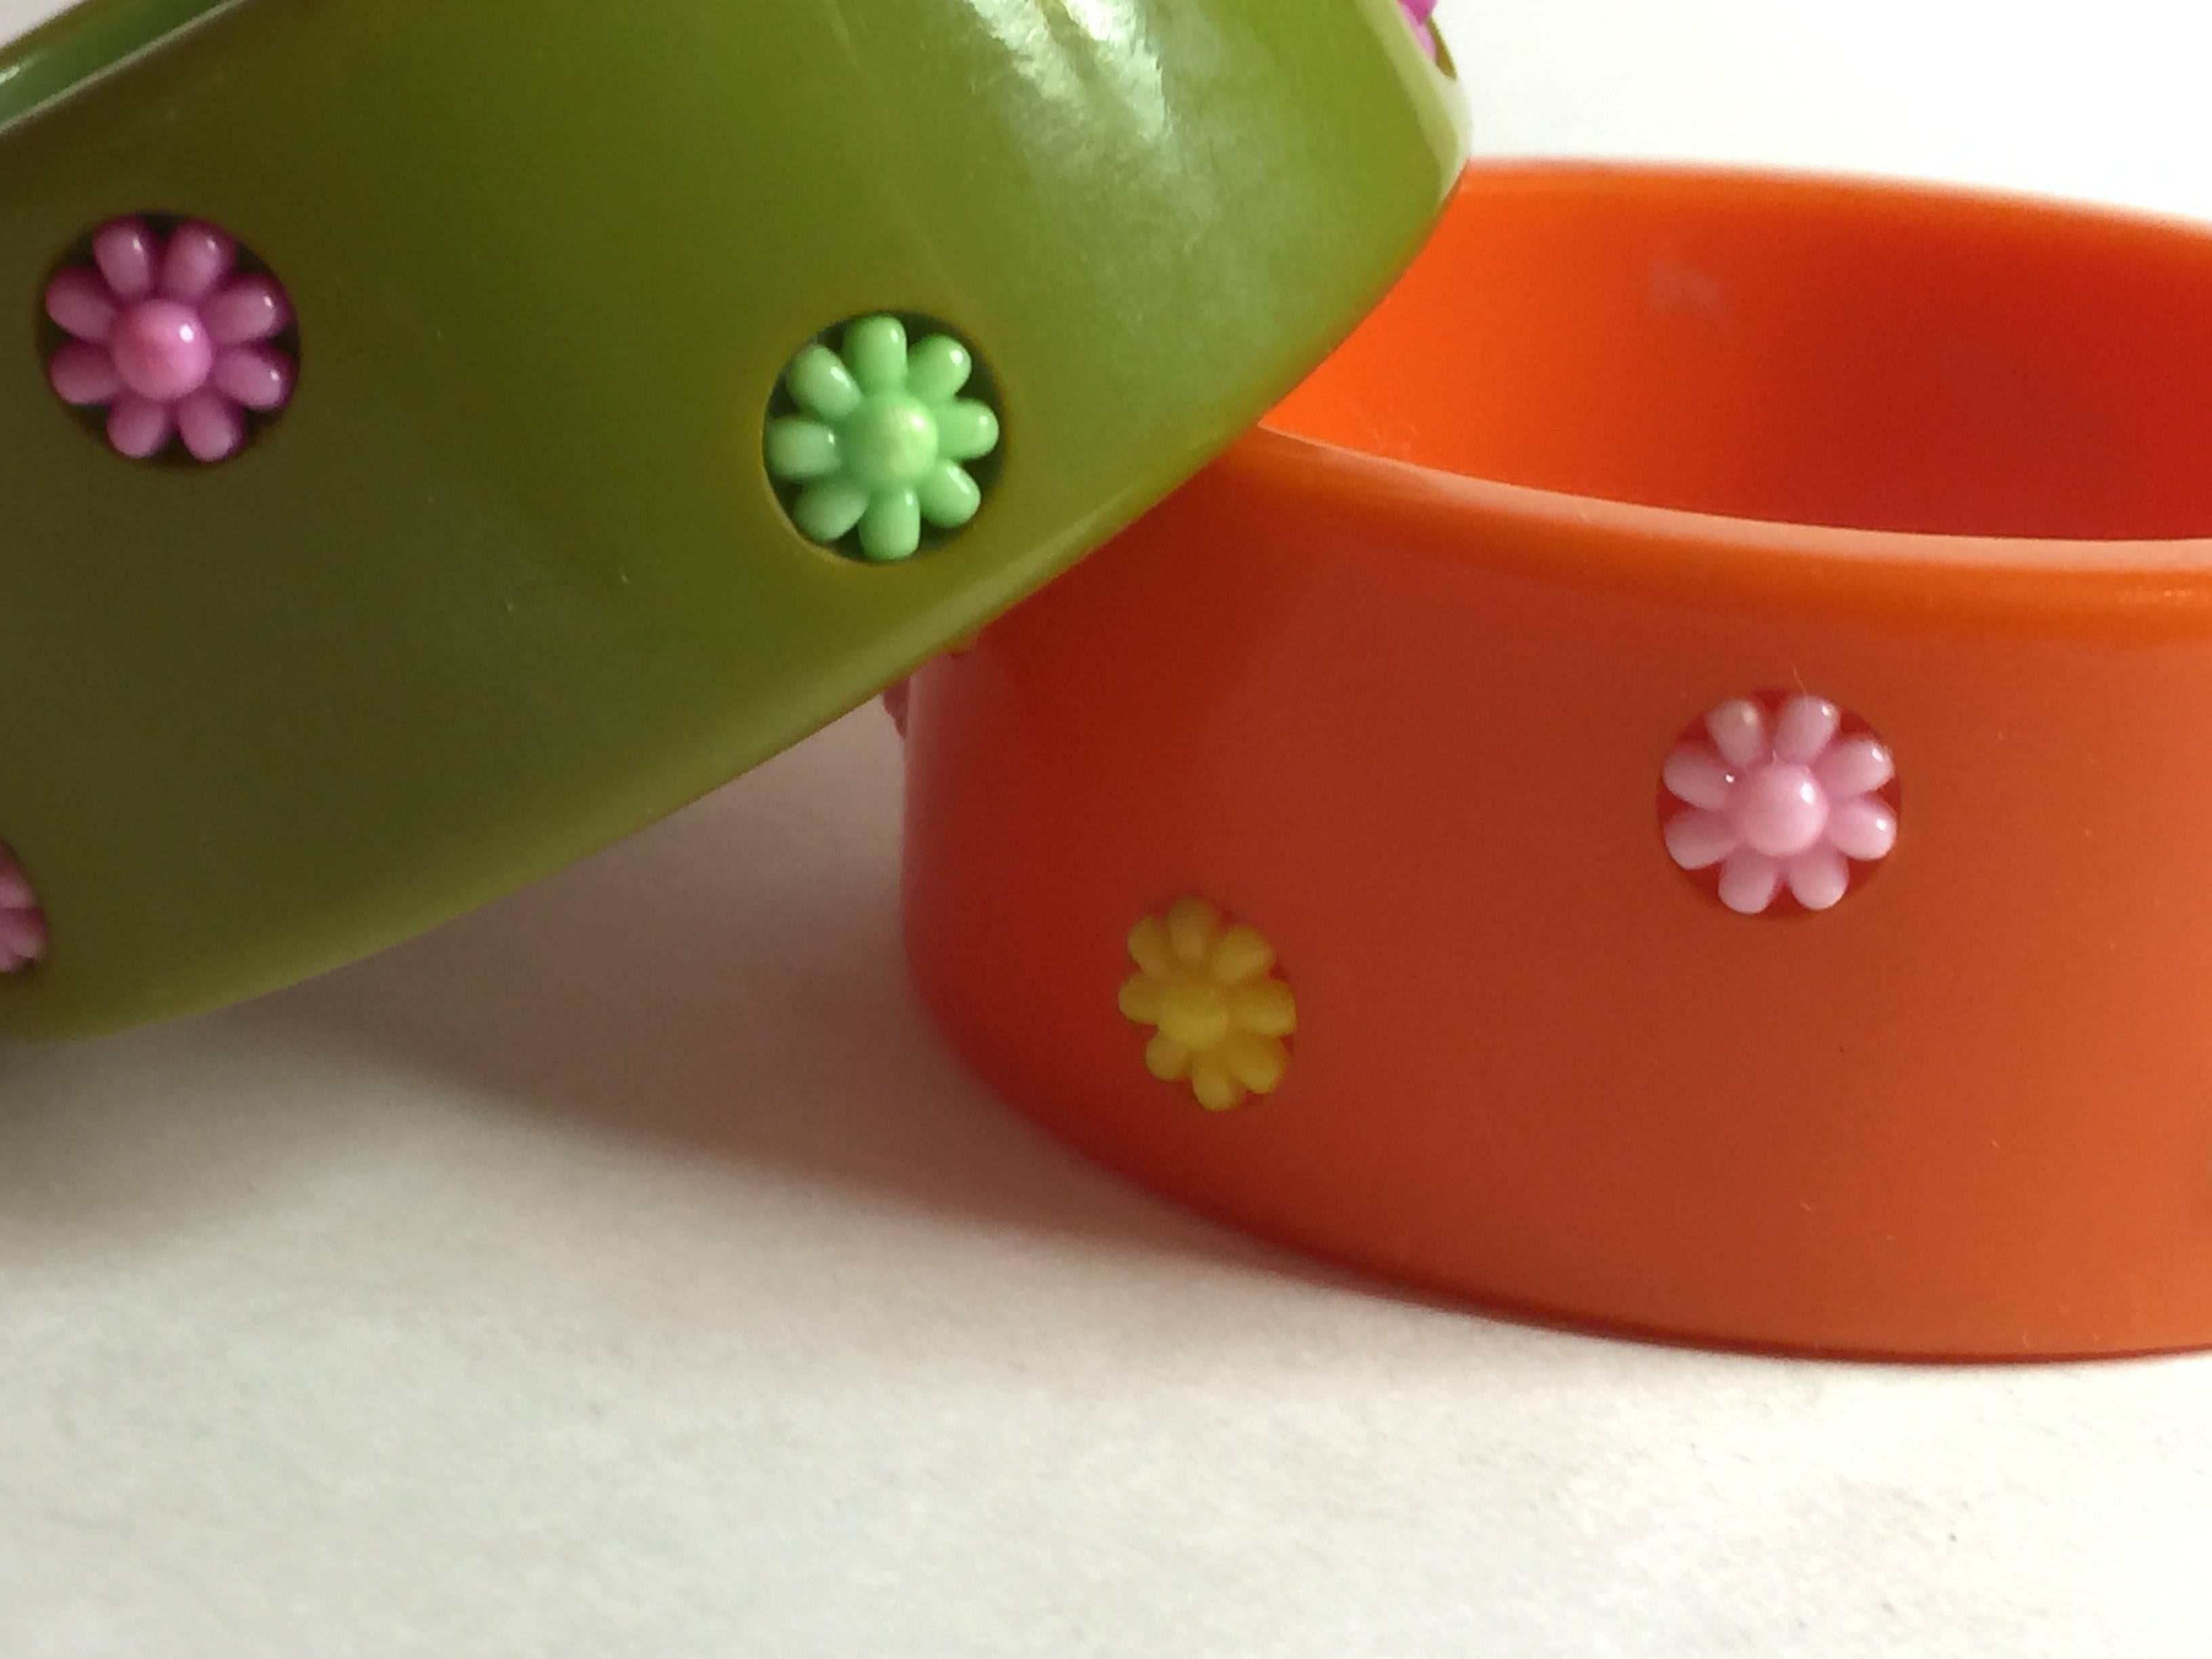 This super-fun 1930s Art Deco Geometric Dotted Inlaid  pair of Bakelite bangles in  Orange and Green, with lighter thermoplastic multicolored asterisj shaped dot inserts...in a variety of colors on each,  Its ironic that these late deco items from